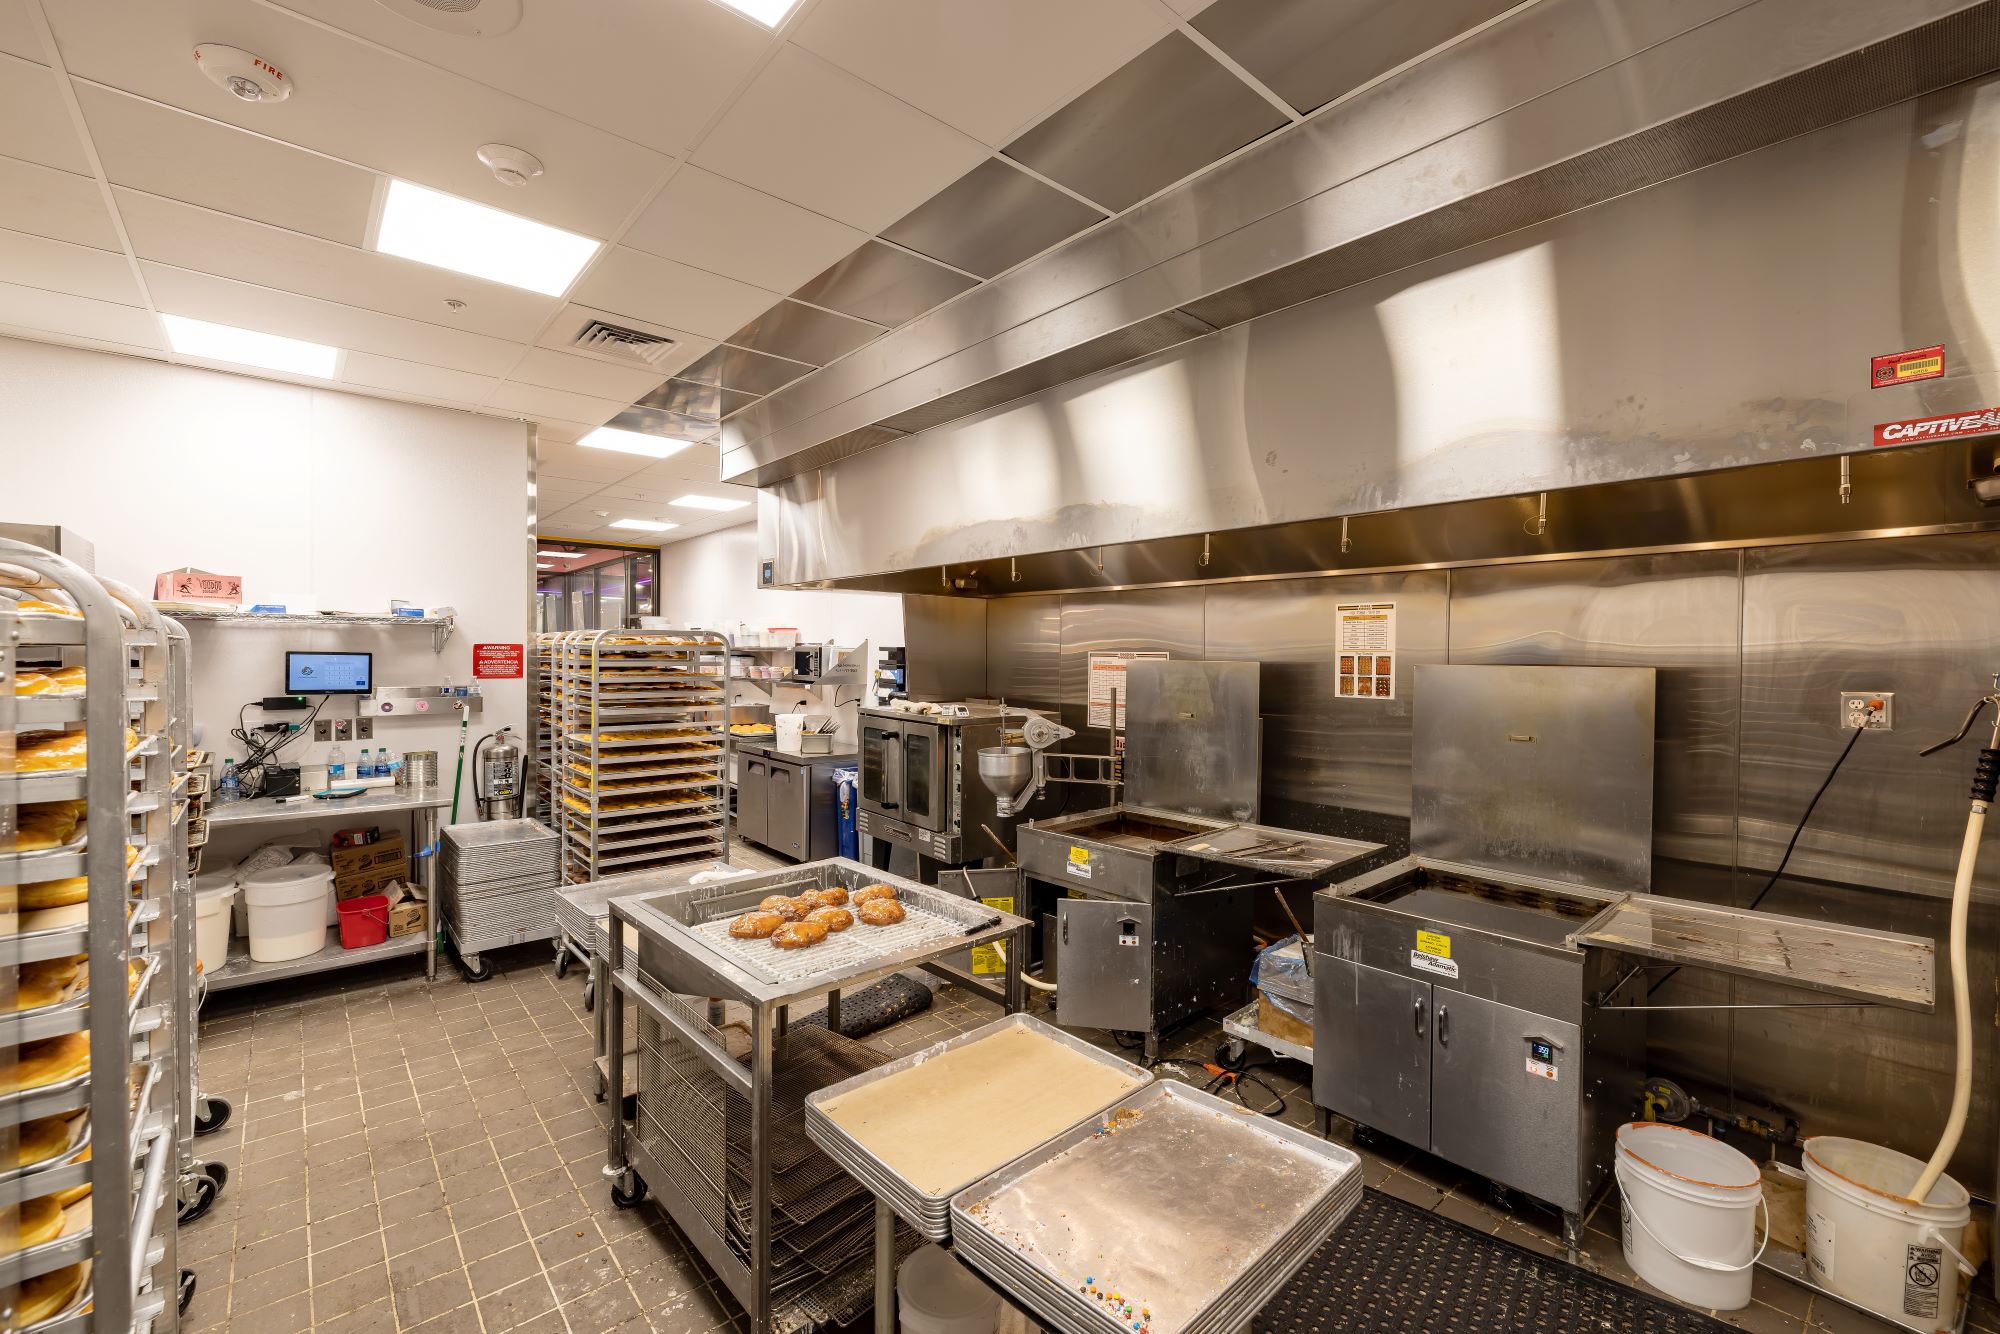 Inside the kitchen at Voodoo doughnuts